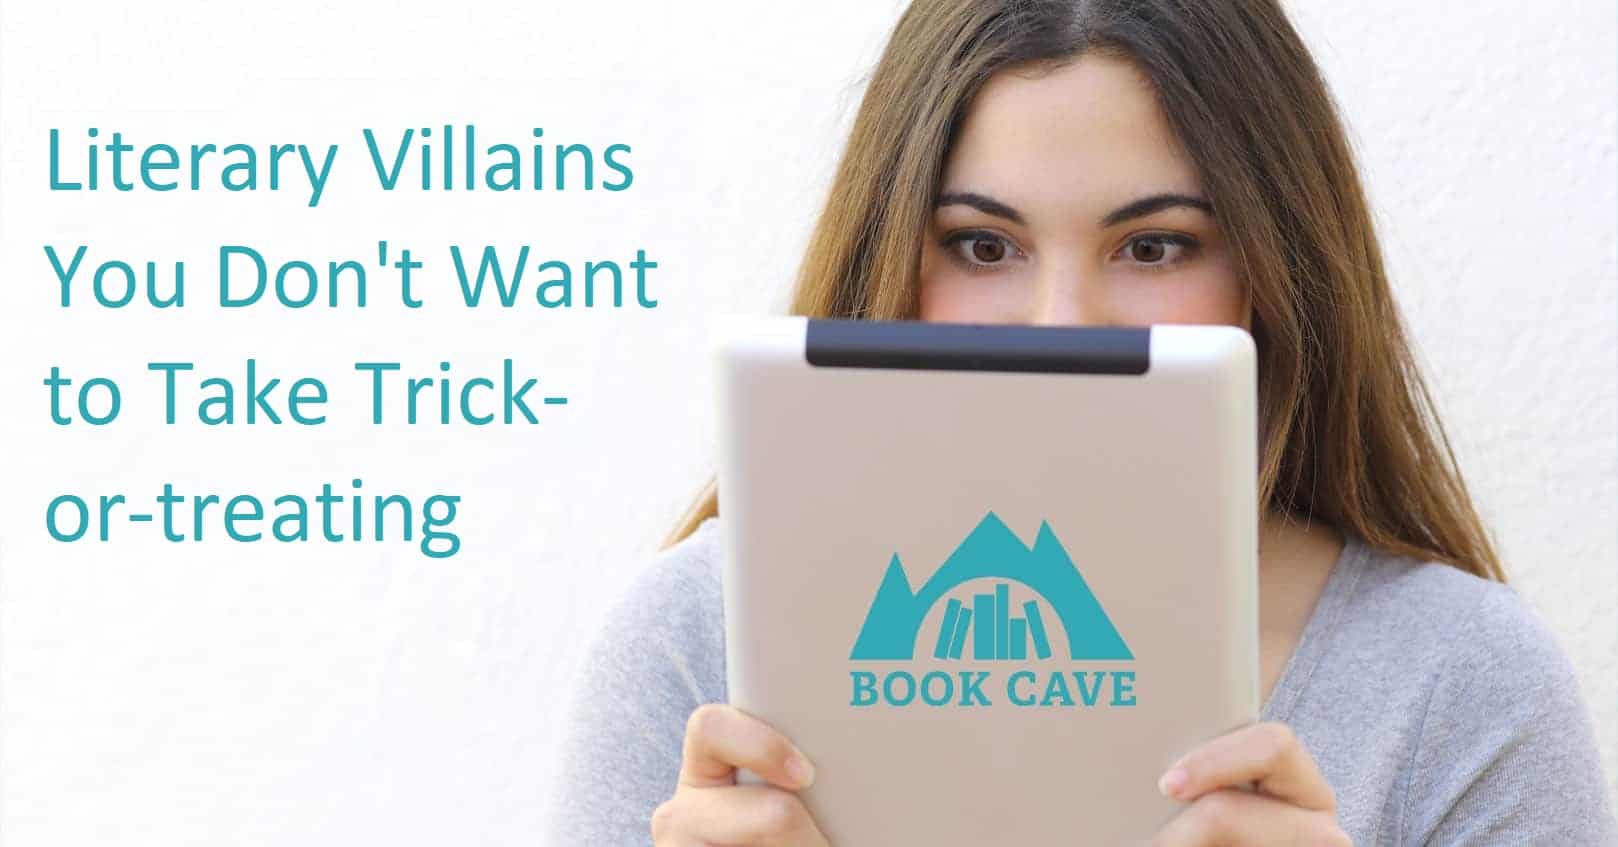 Literary Villains You Don’t Want to Take Trick-or-treating